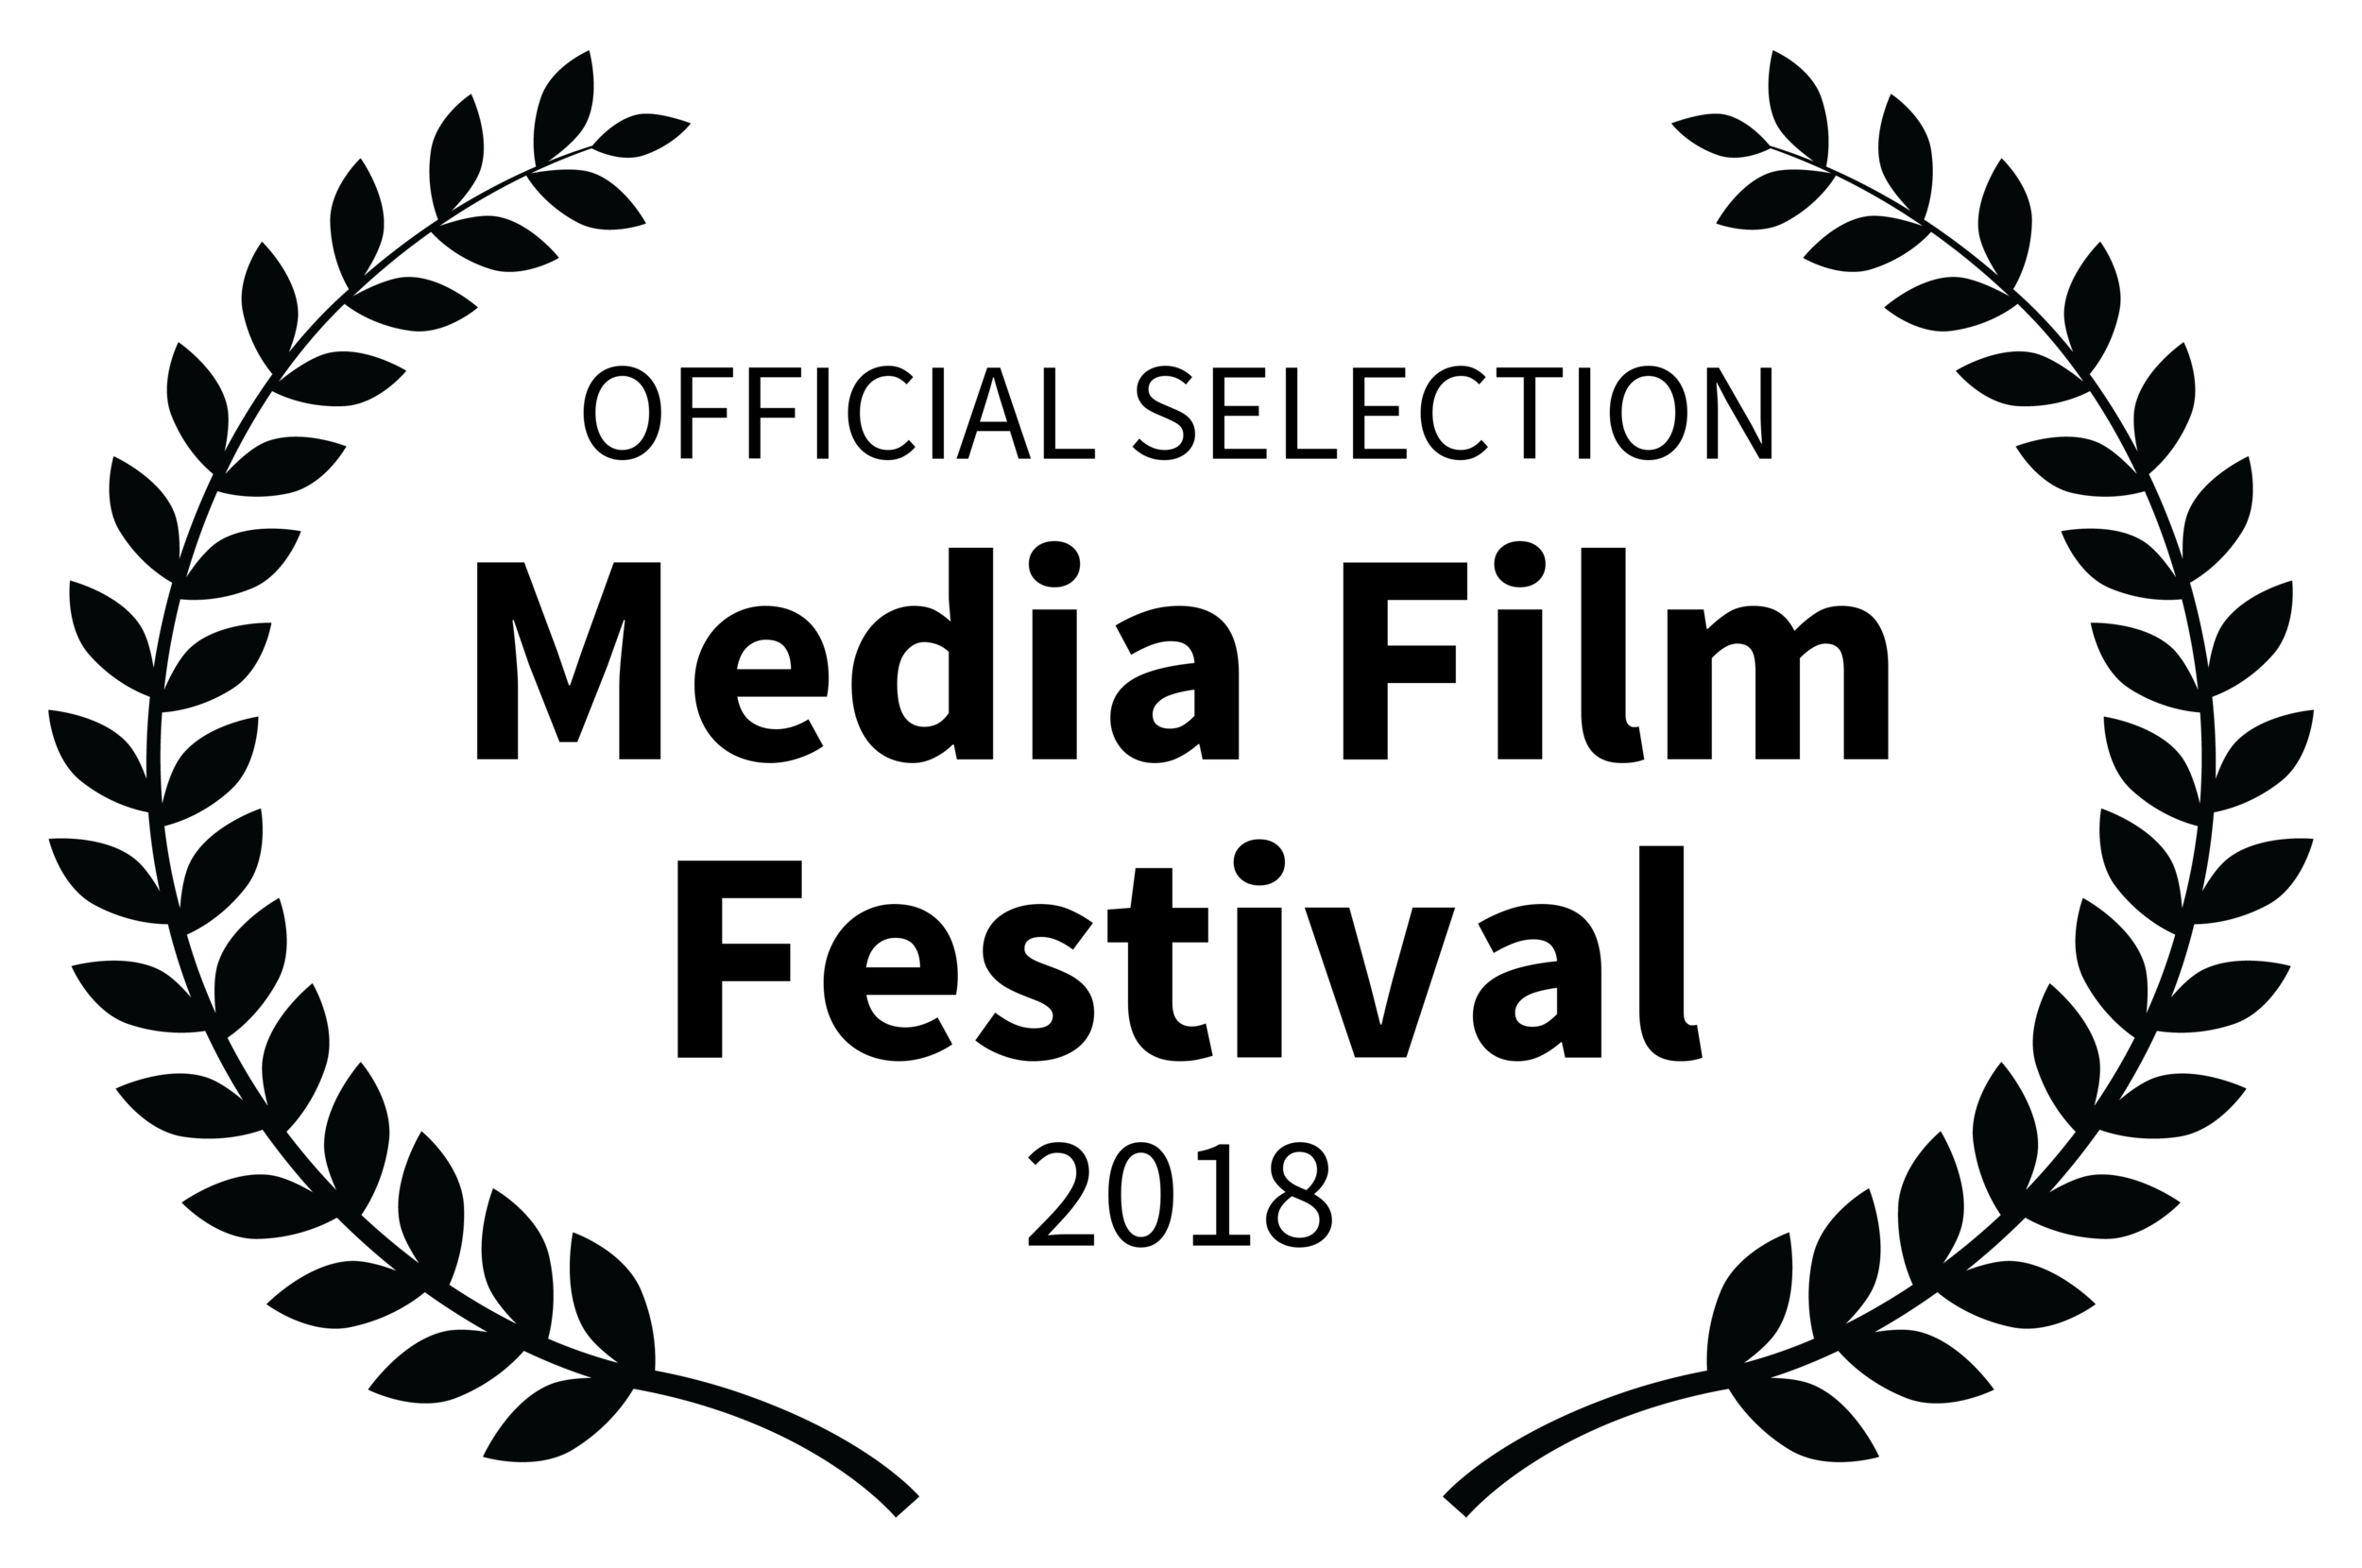 OFFICIALSELECTION-MediaFilmFestival-2018bw.png